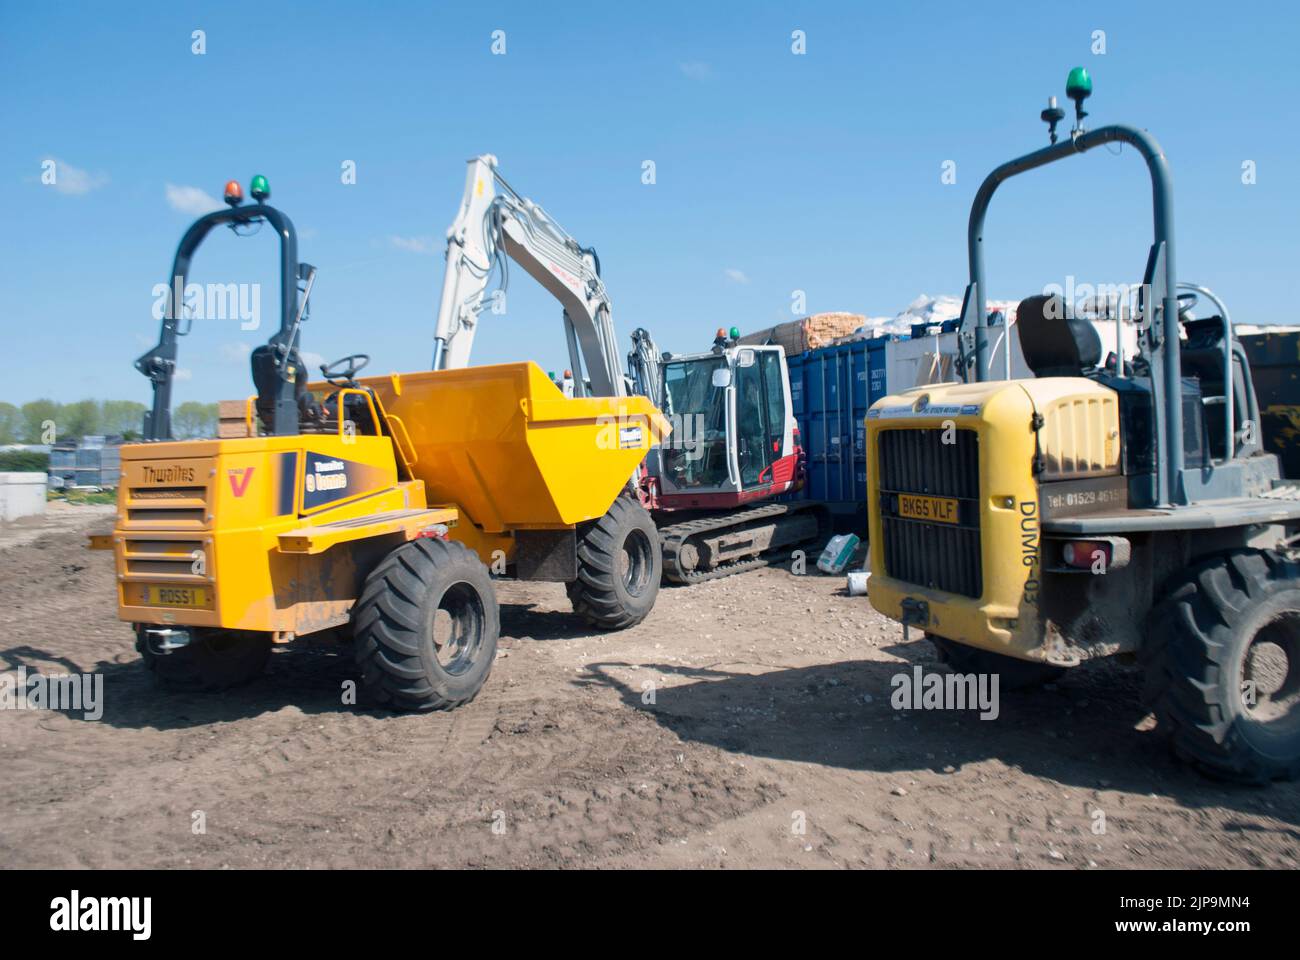 Newly constructed houses building site Stock Photo